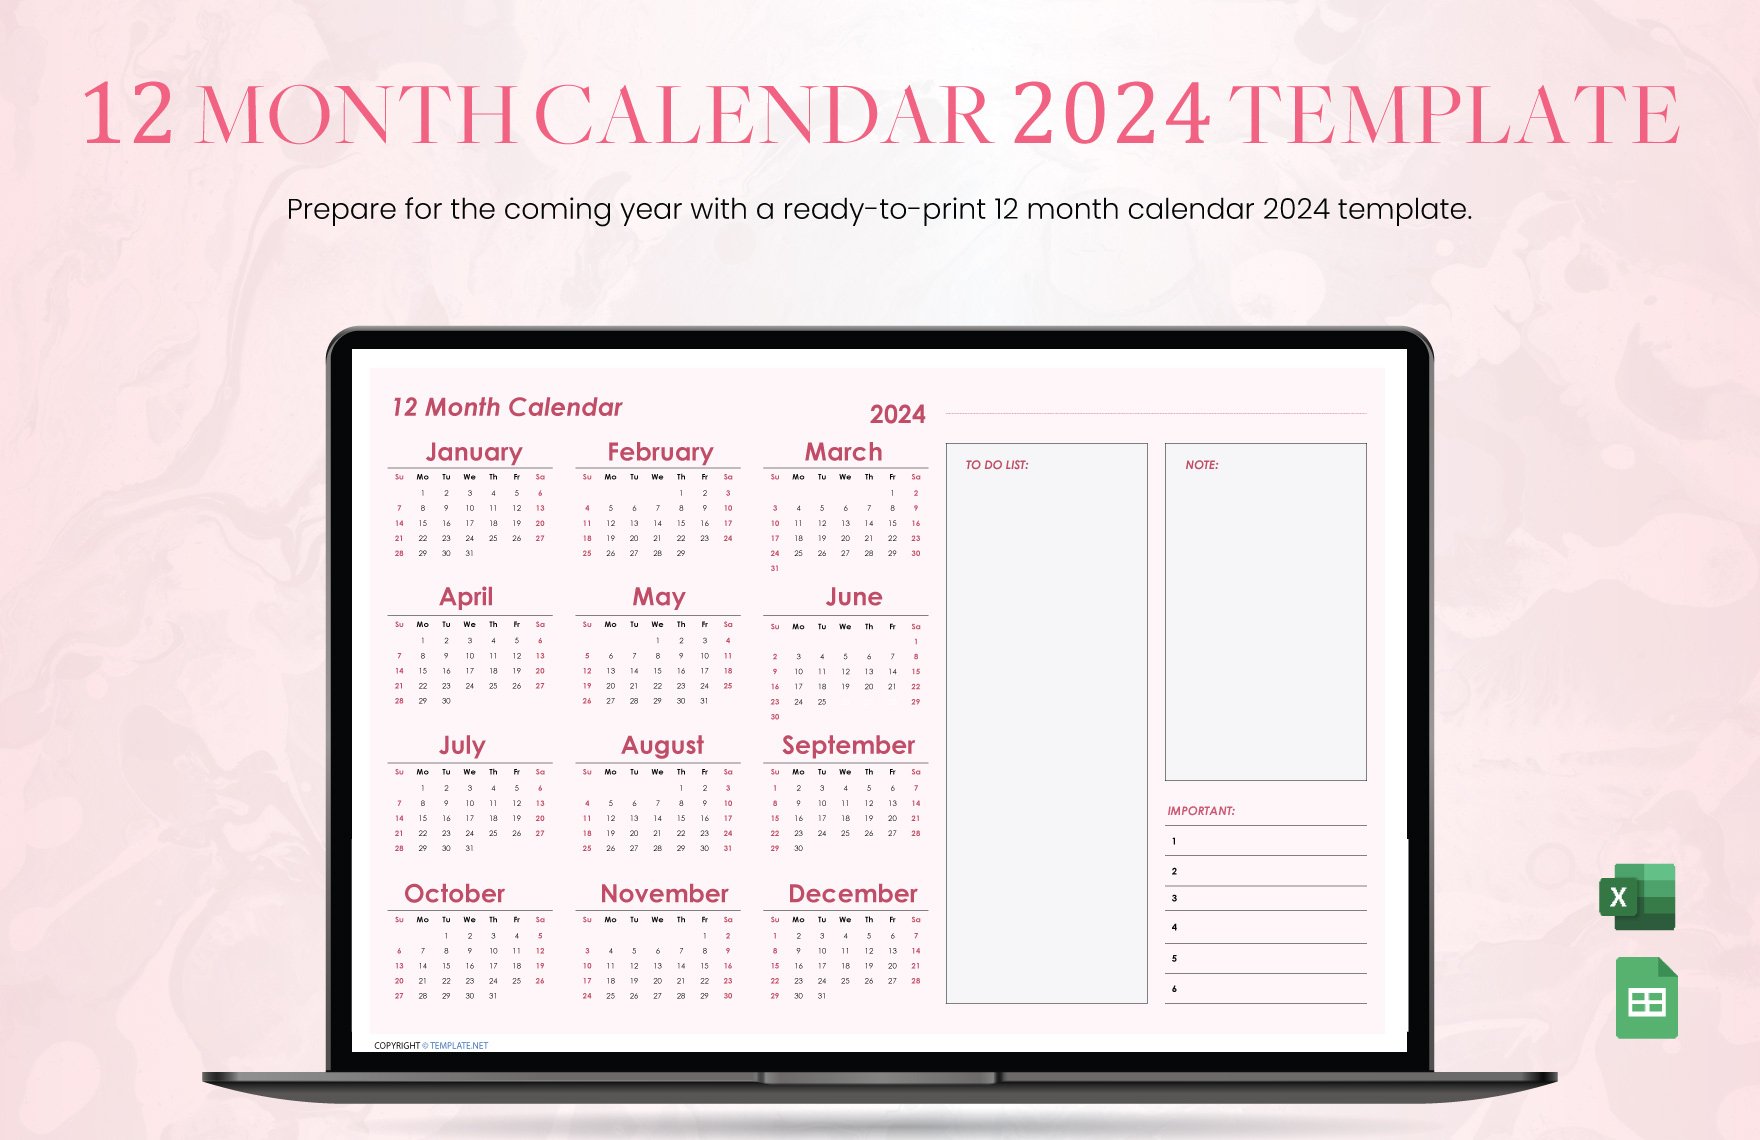 12 month Calendar 2024 Template in Excel, Google Sheets - Download